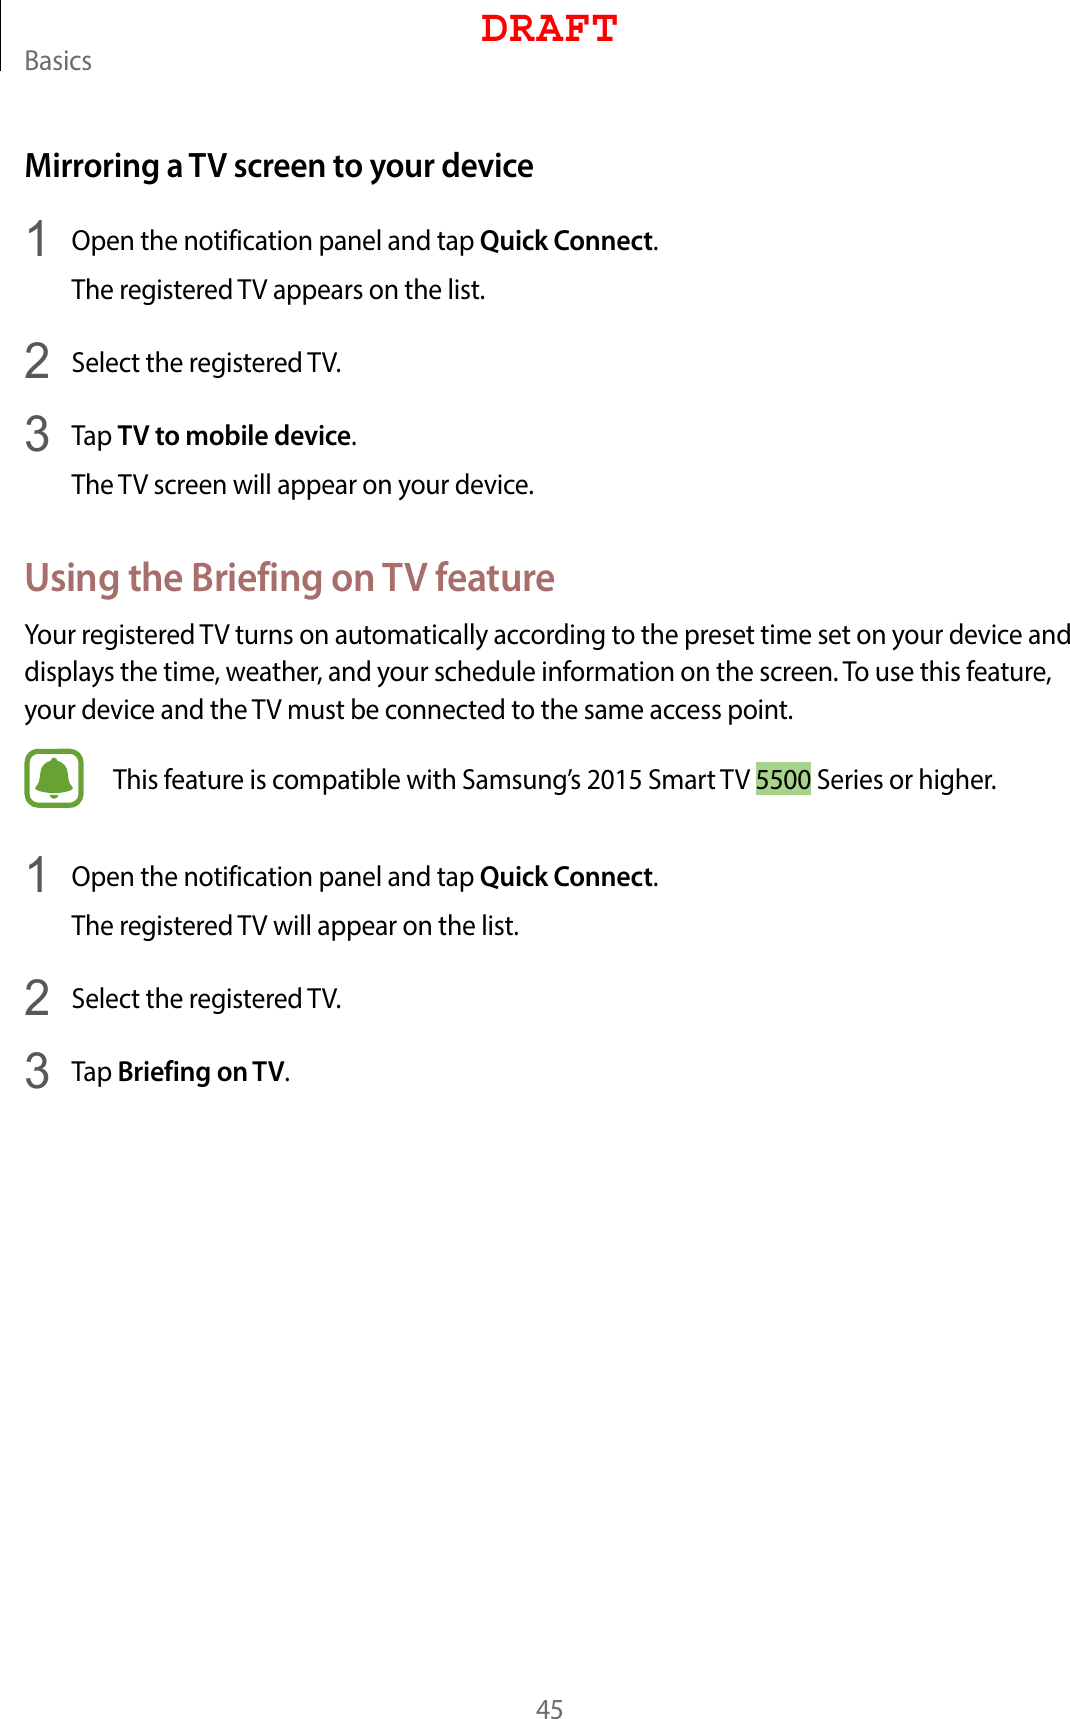 Basics45Mirroring a TV screen to your device1  Open the notification panel and tap Quick Connect.The registered TV appears on the list.2  Select the registered TV.3  Tap TV to mobile device.The TV screen will appear on your device.Using the Briefing on TV featureYour registered TV turns on automatically according to the preset time set on your device and displays the time, weather, and your schedule information on the screen. To use this feature, your device and the TV must be connected to the same access point.This feature is compatible with Samsung’s 2015 Smart TV 5500 Series or higher.1  Open the notification panel and tap Quick Connect.The registered TV will appear on the list.2  Select the registered TV.3  Tap Briefing on TV.DRAFT